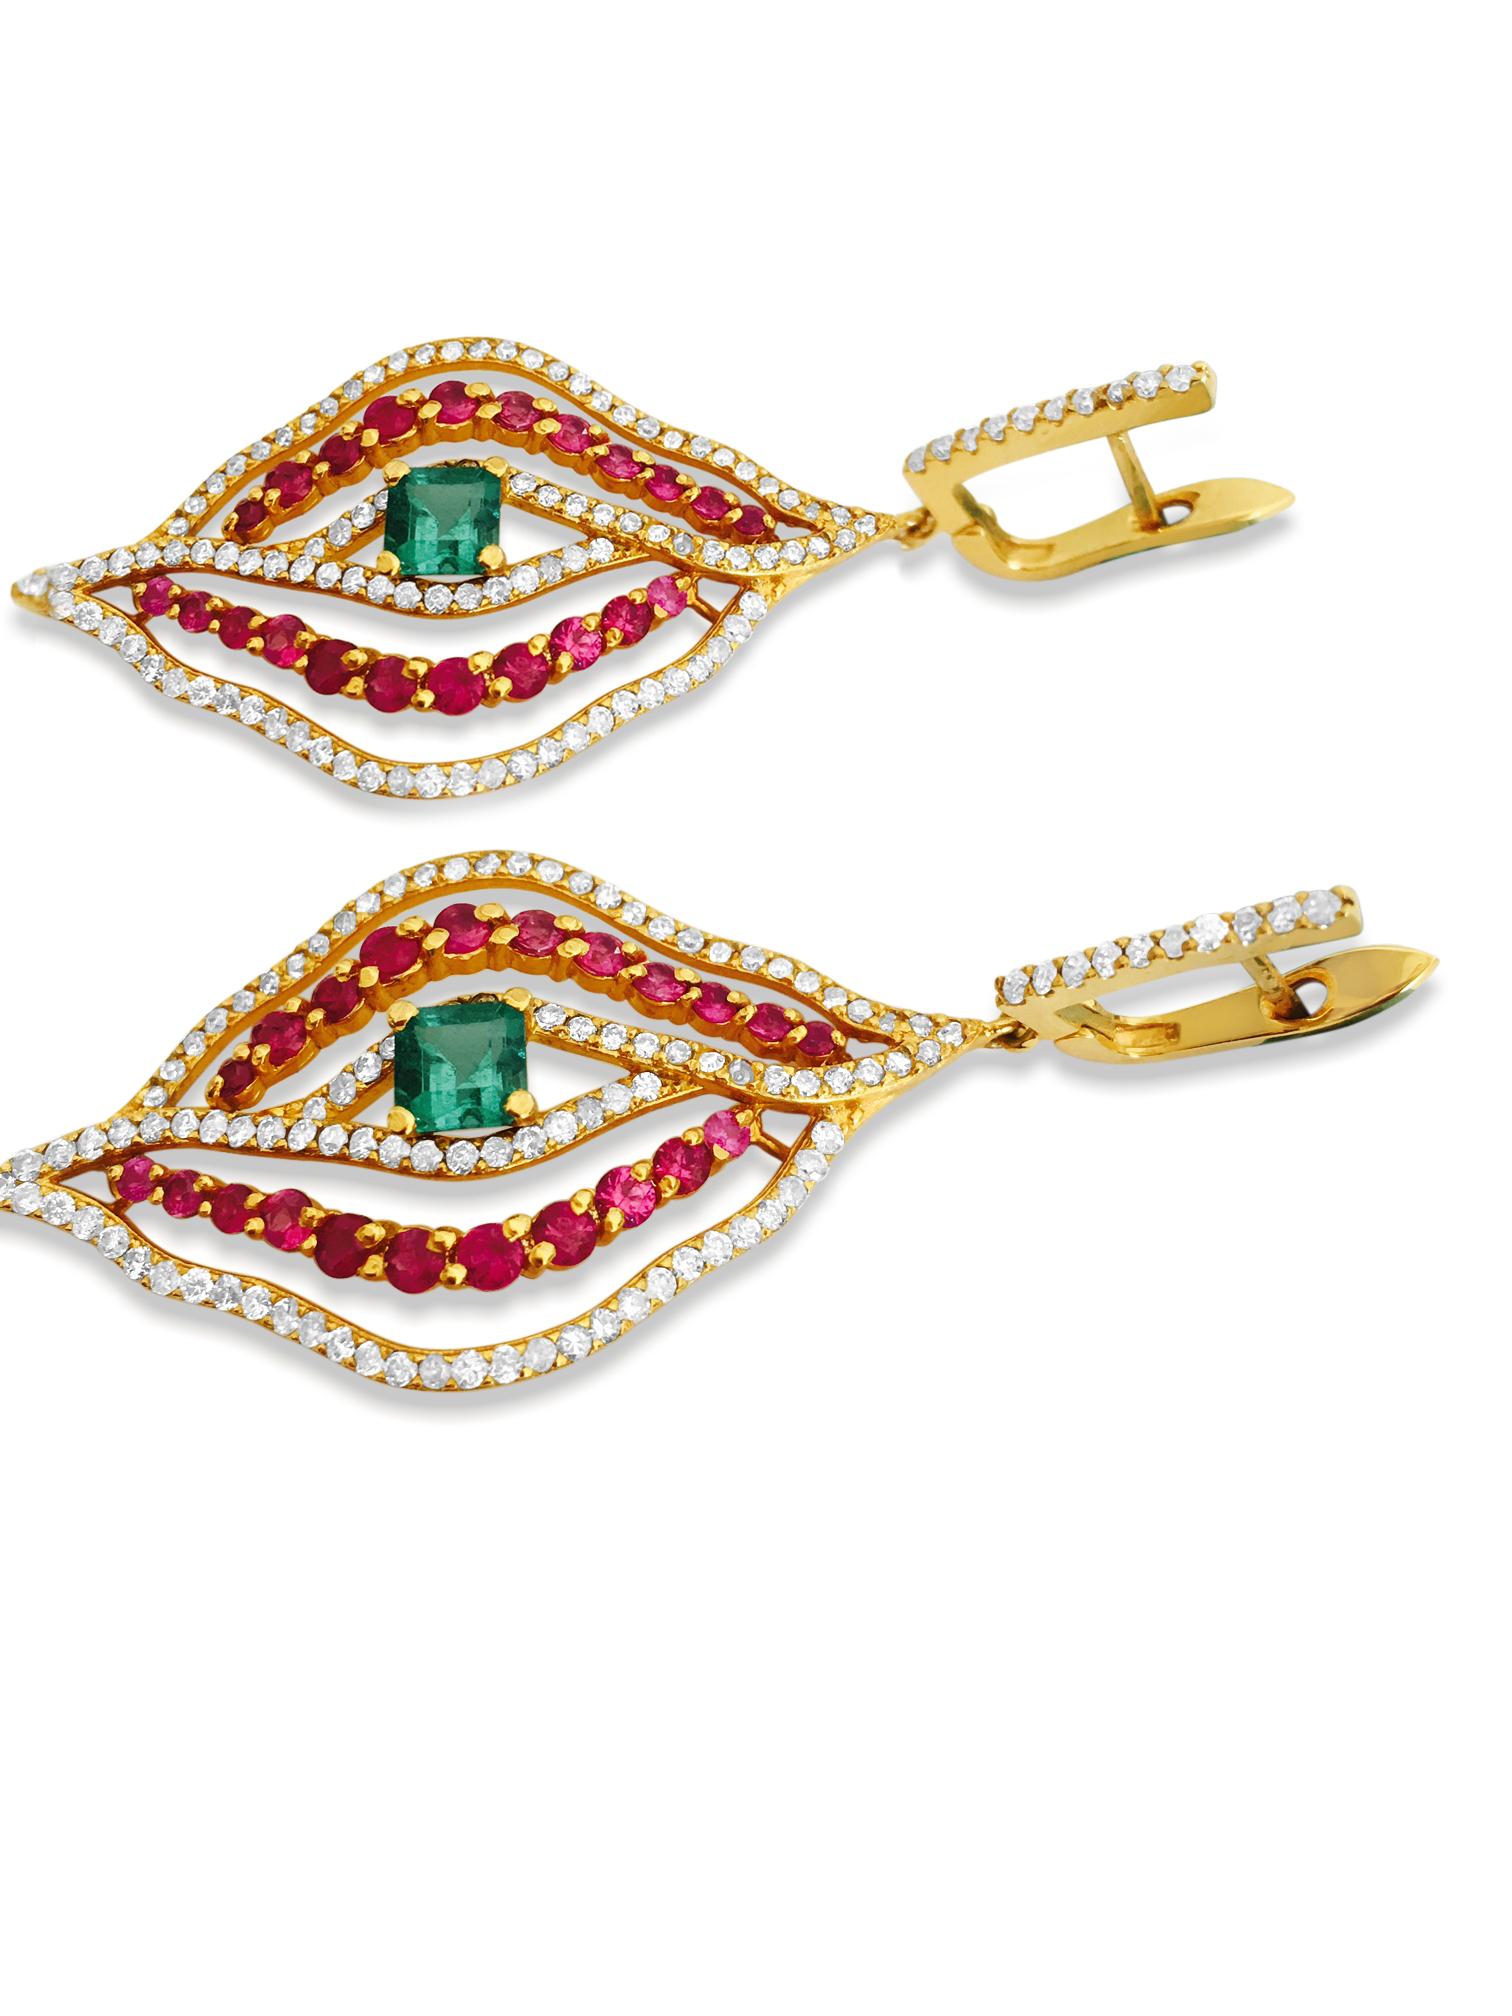 Crafted from 14K yellow gold, these earrings boast a captivating ensemble of gemstones. With a total diamond weight of 2.00 carats and VS clarity, the round brilliant cut diamonds are complemented by vibrant rubies from Burma, totaling 2.50 carats,